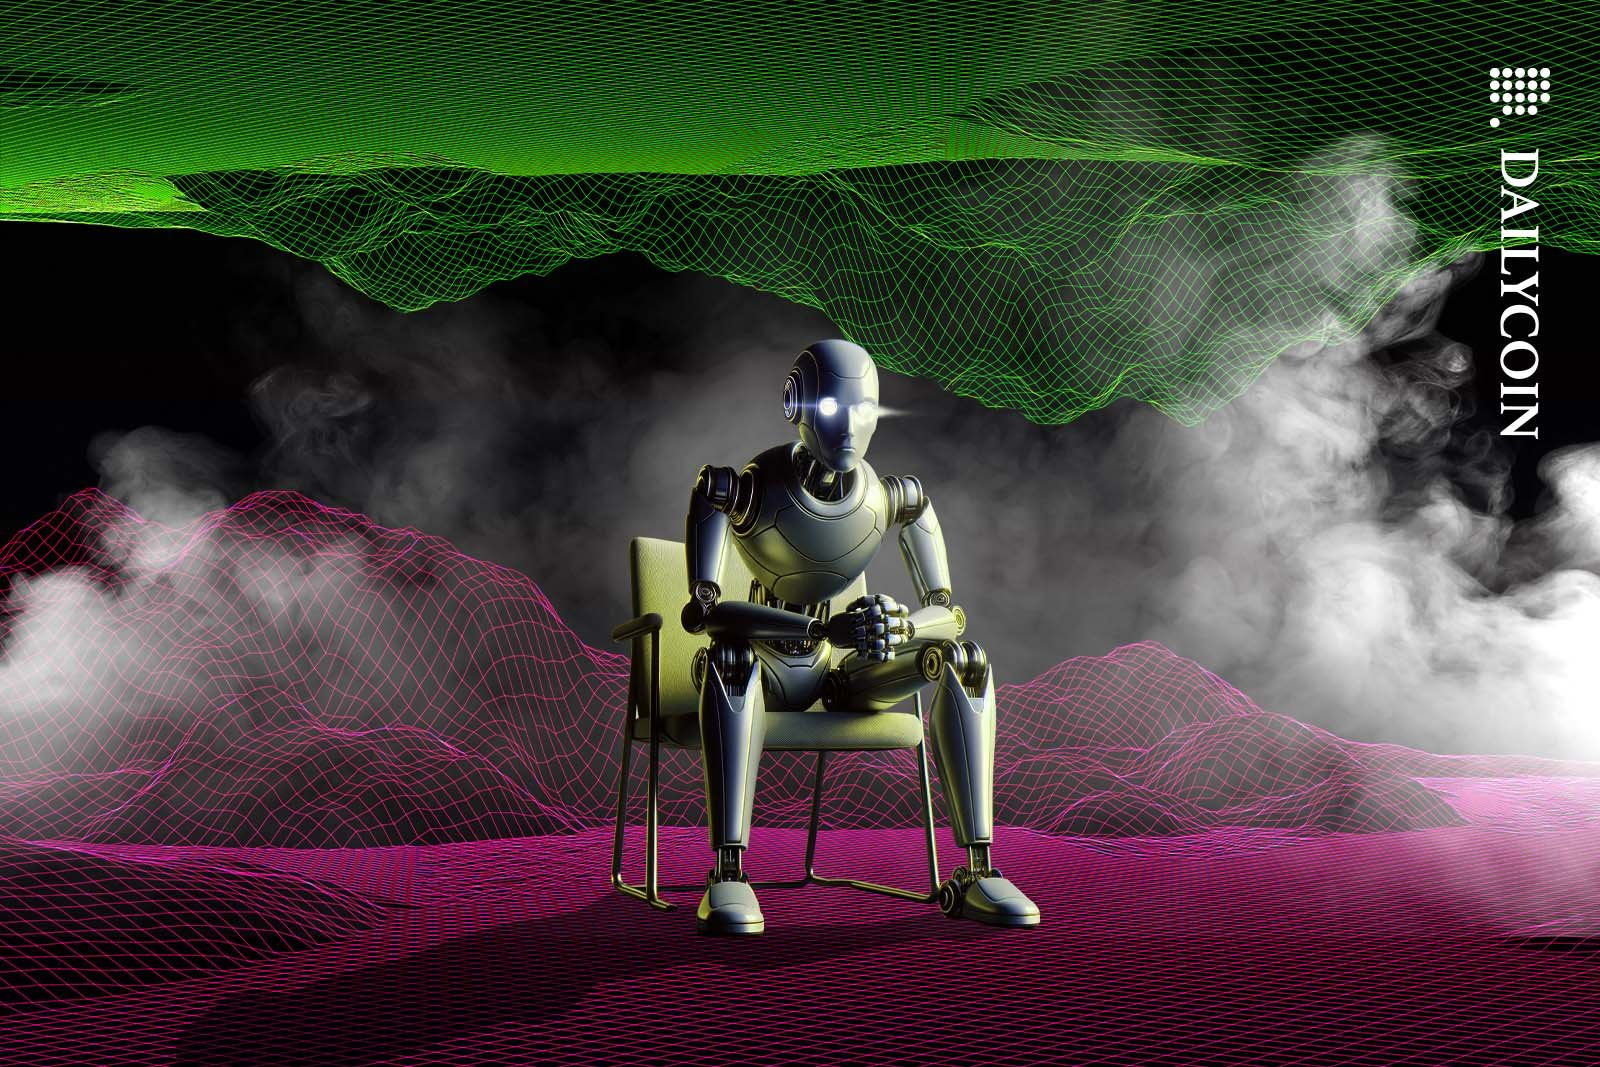 A robot sitting on a chair, waiting in a digital limbo.